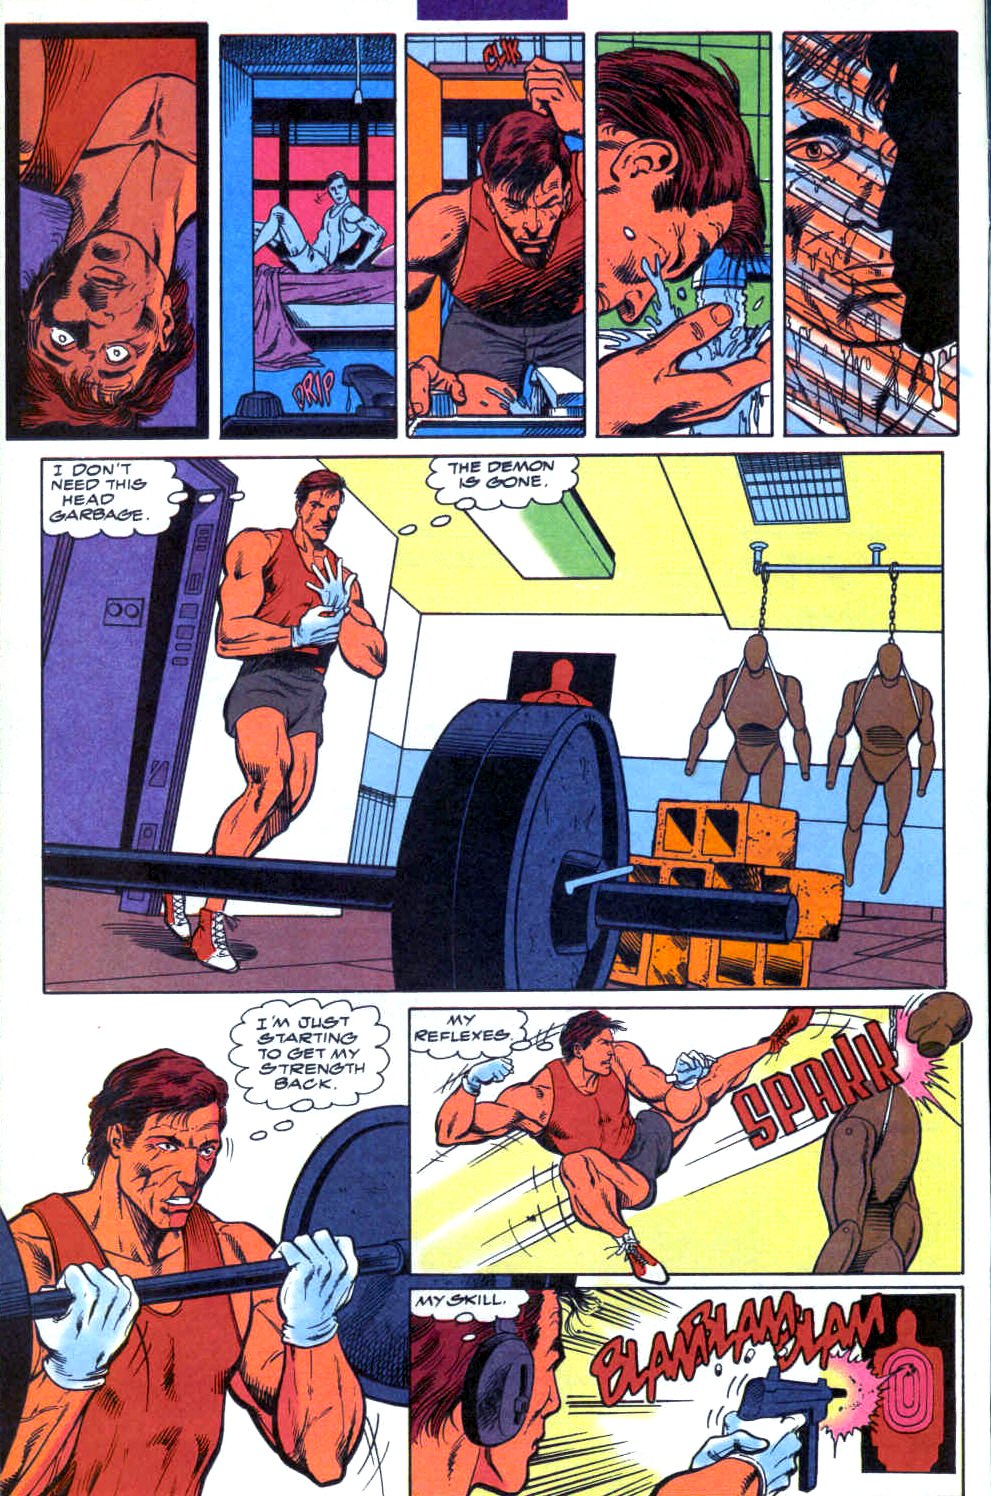 Spider-Man (1990) 24_-_Double_Infinity Page 7